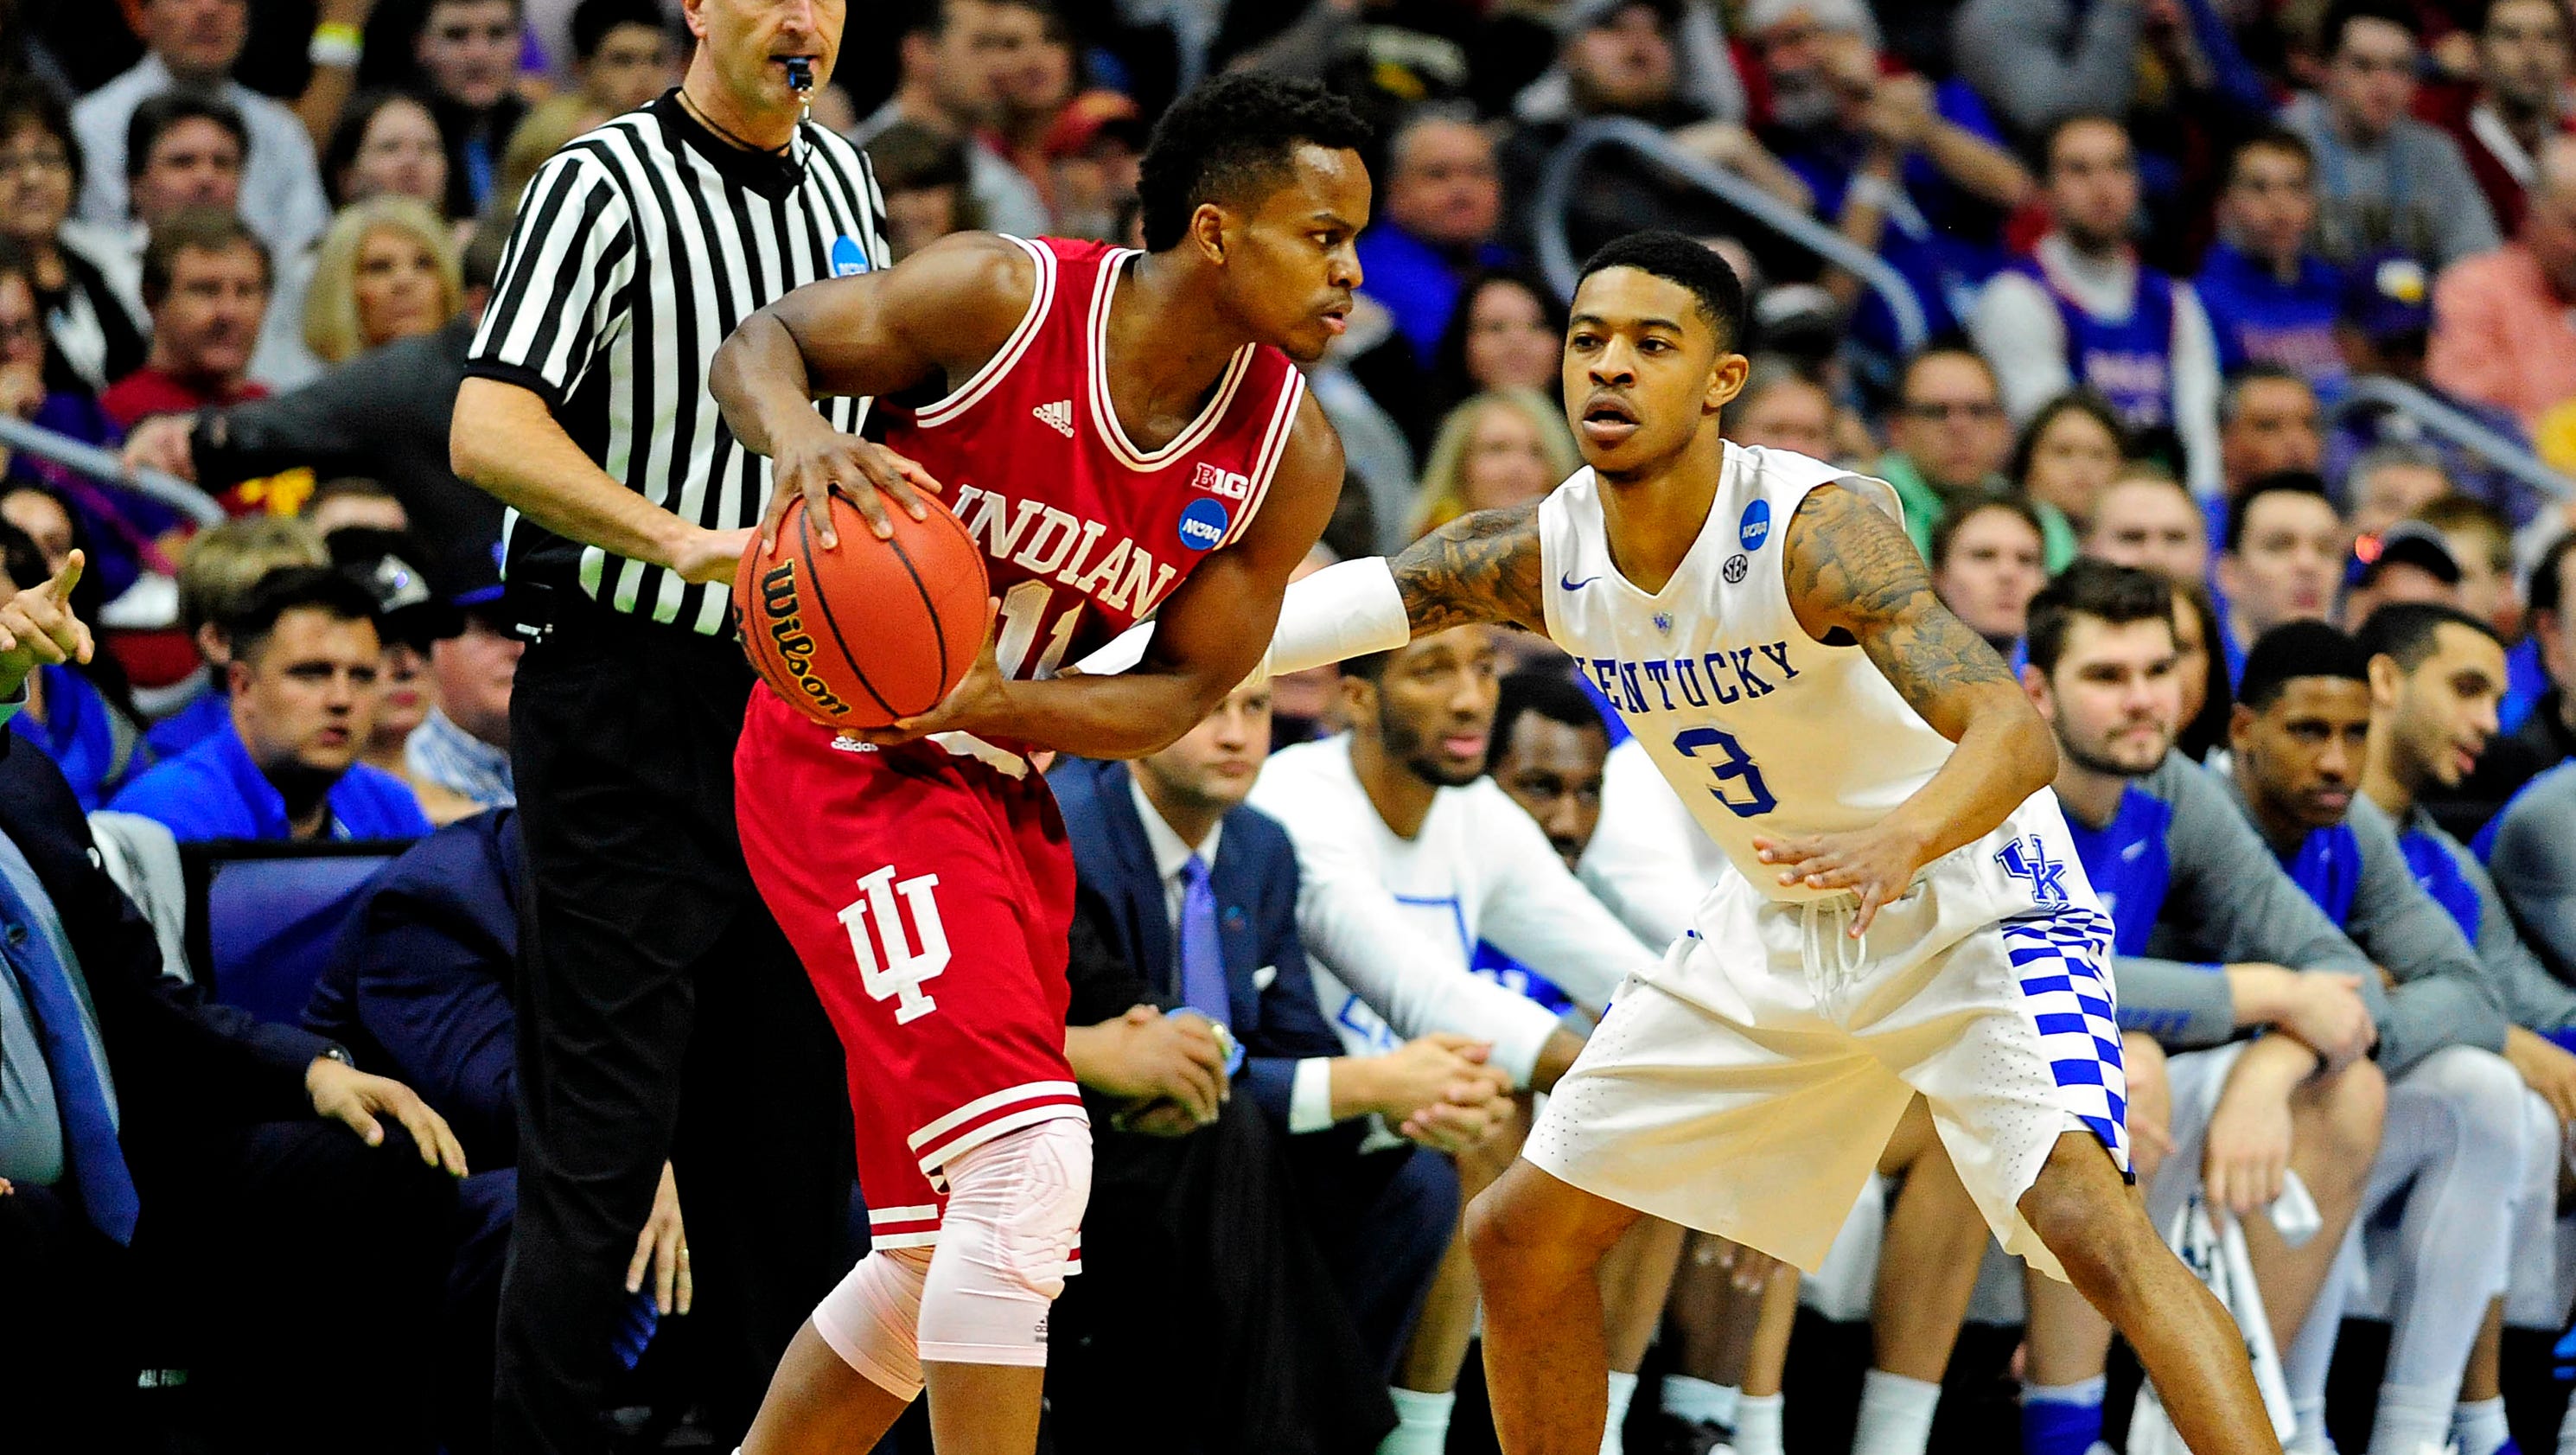 UK Basketball | Live updates from the second-round NCAA tournament game between UK and IU